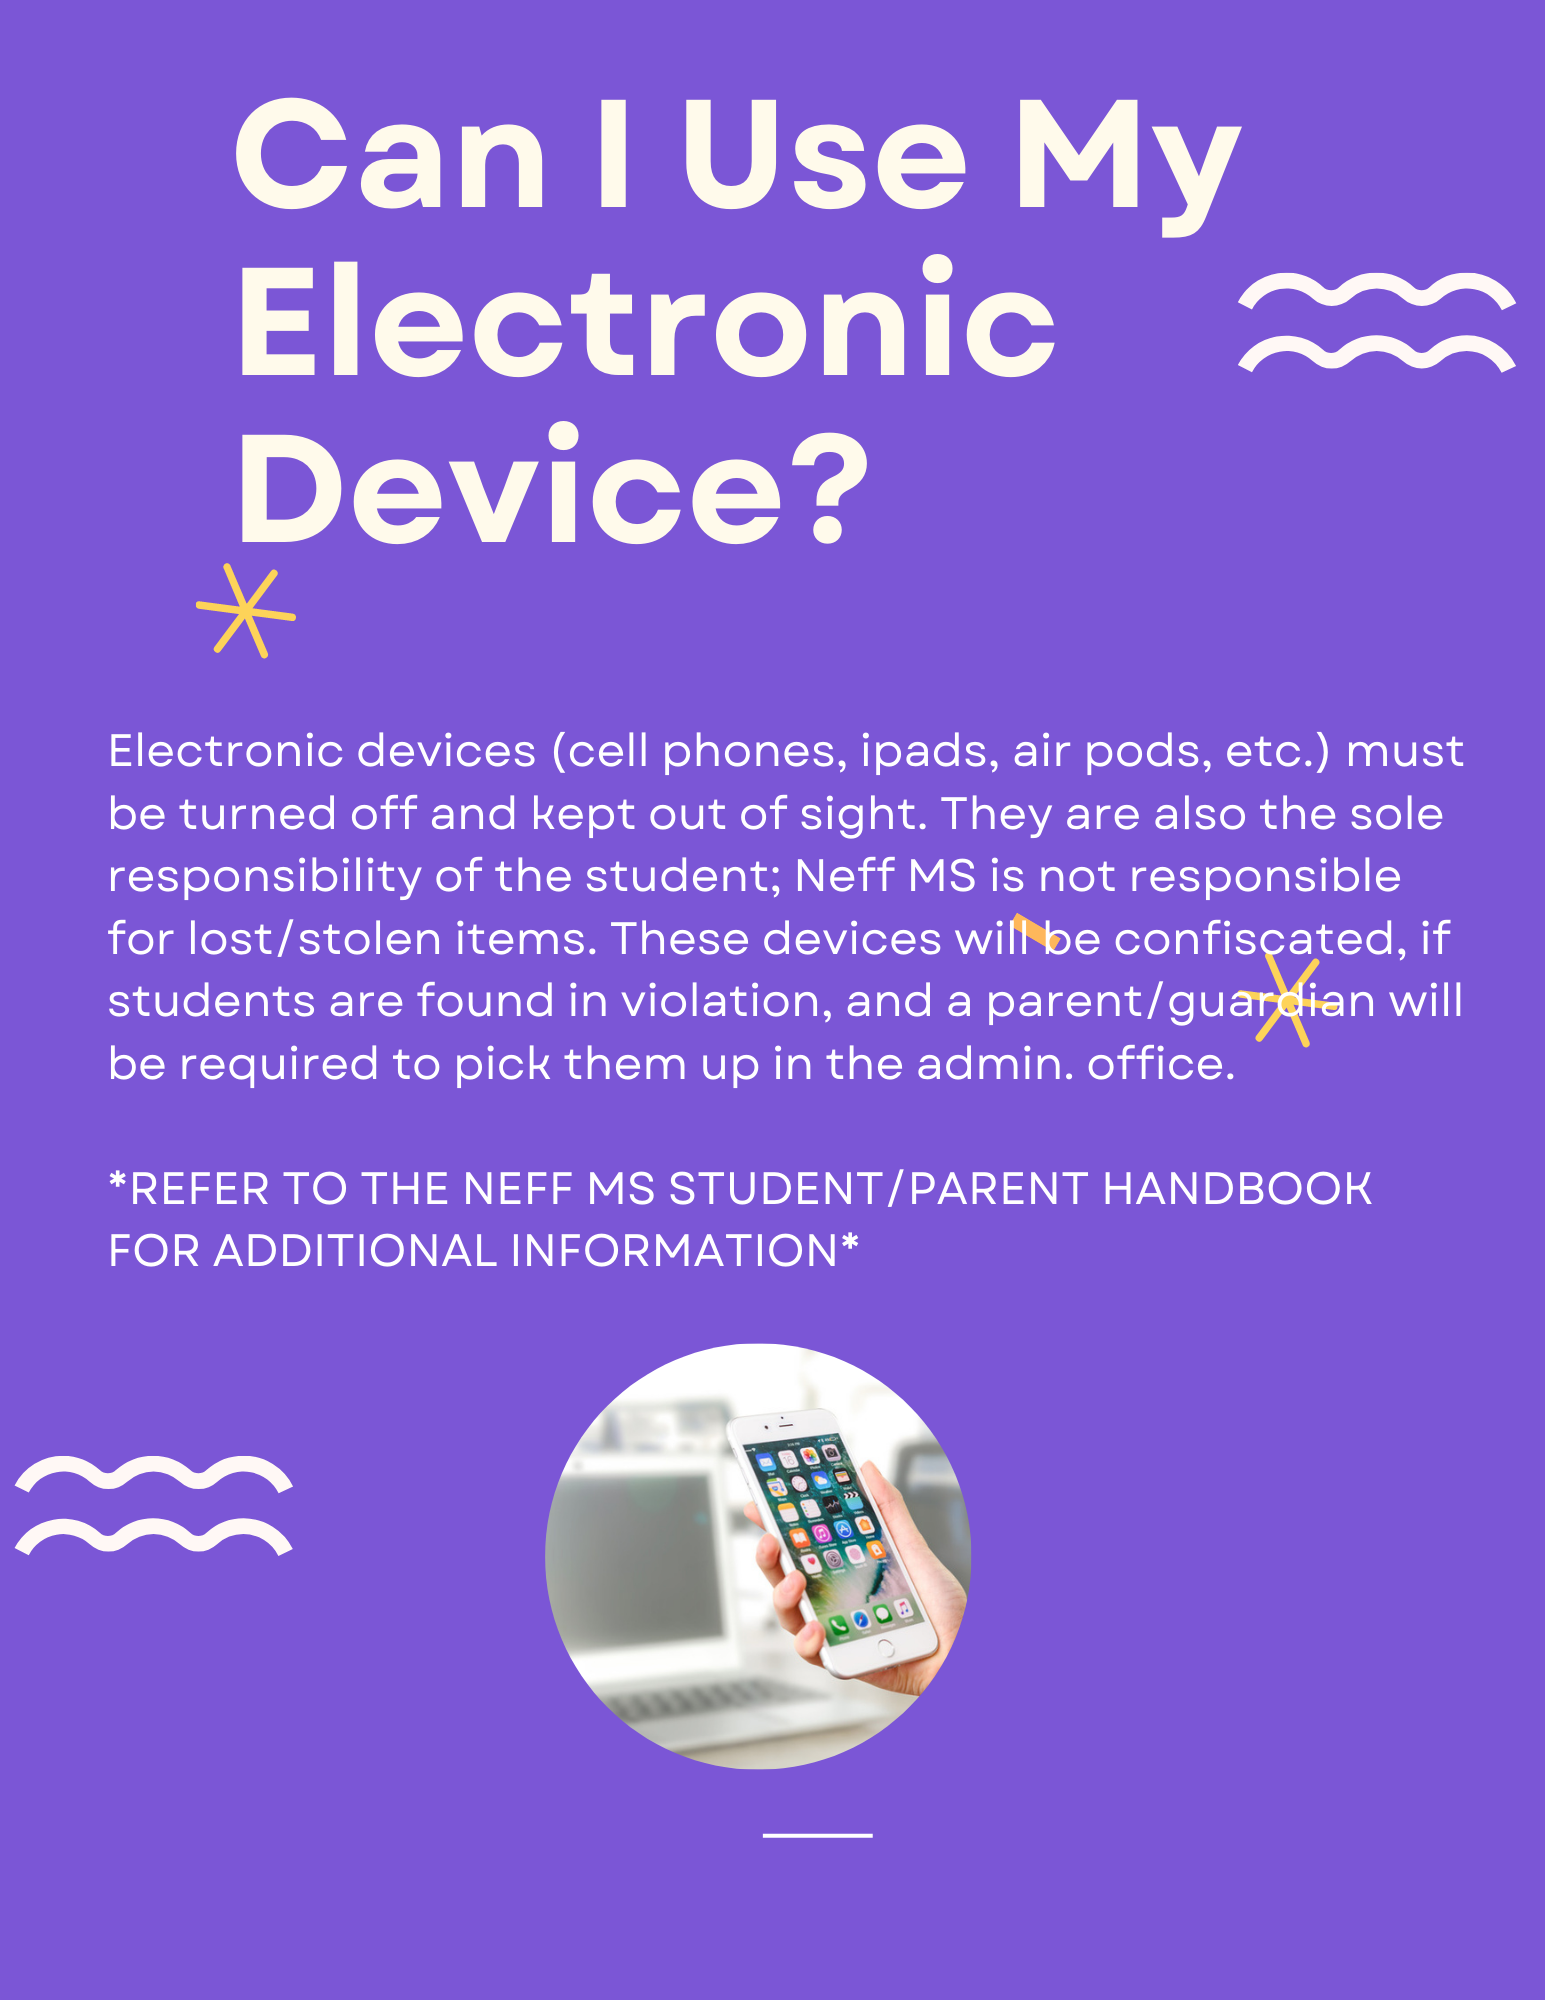 Electronic device policy flyer